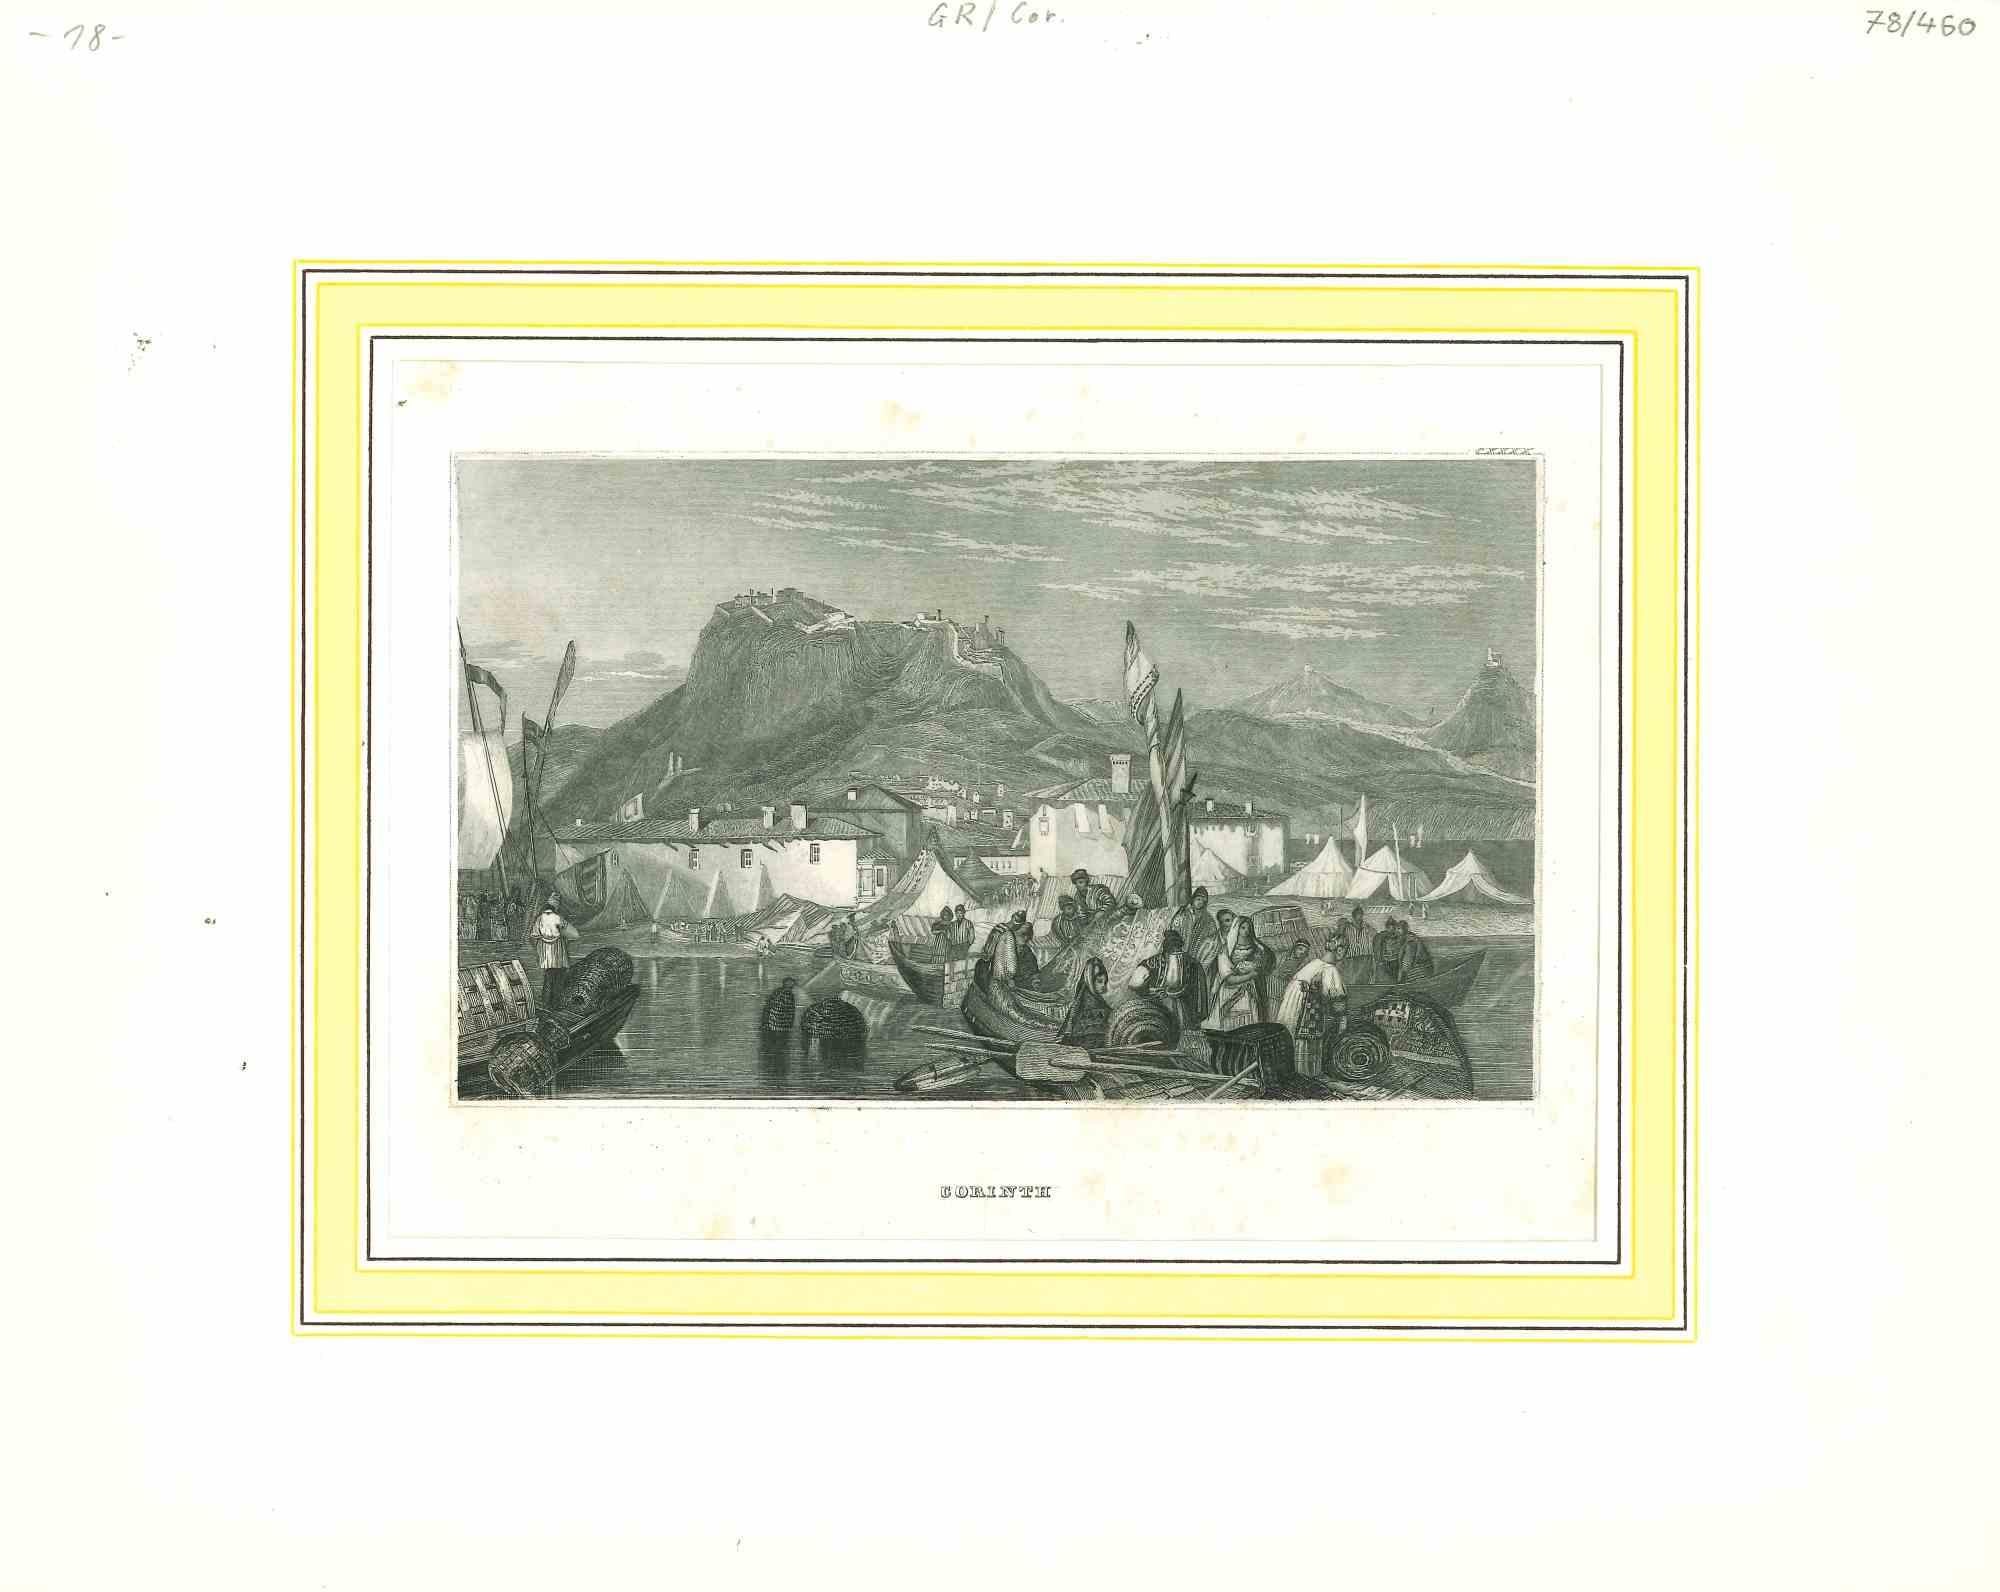 Unknown Figurative Print - Ancient View of Corynth - Original Lithograph - Mid-19th Century